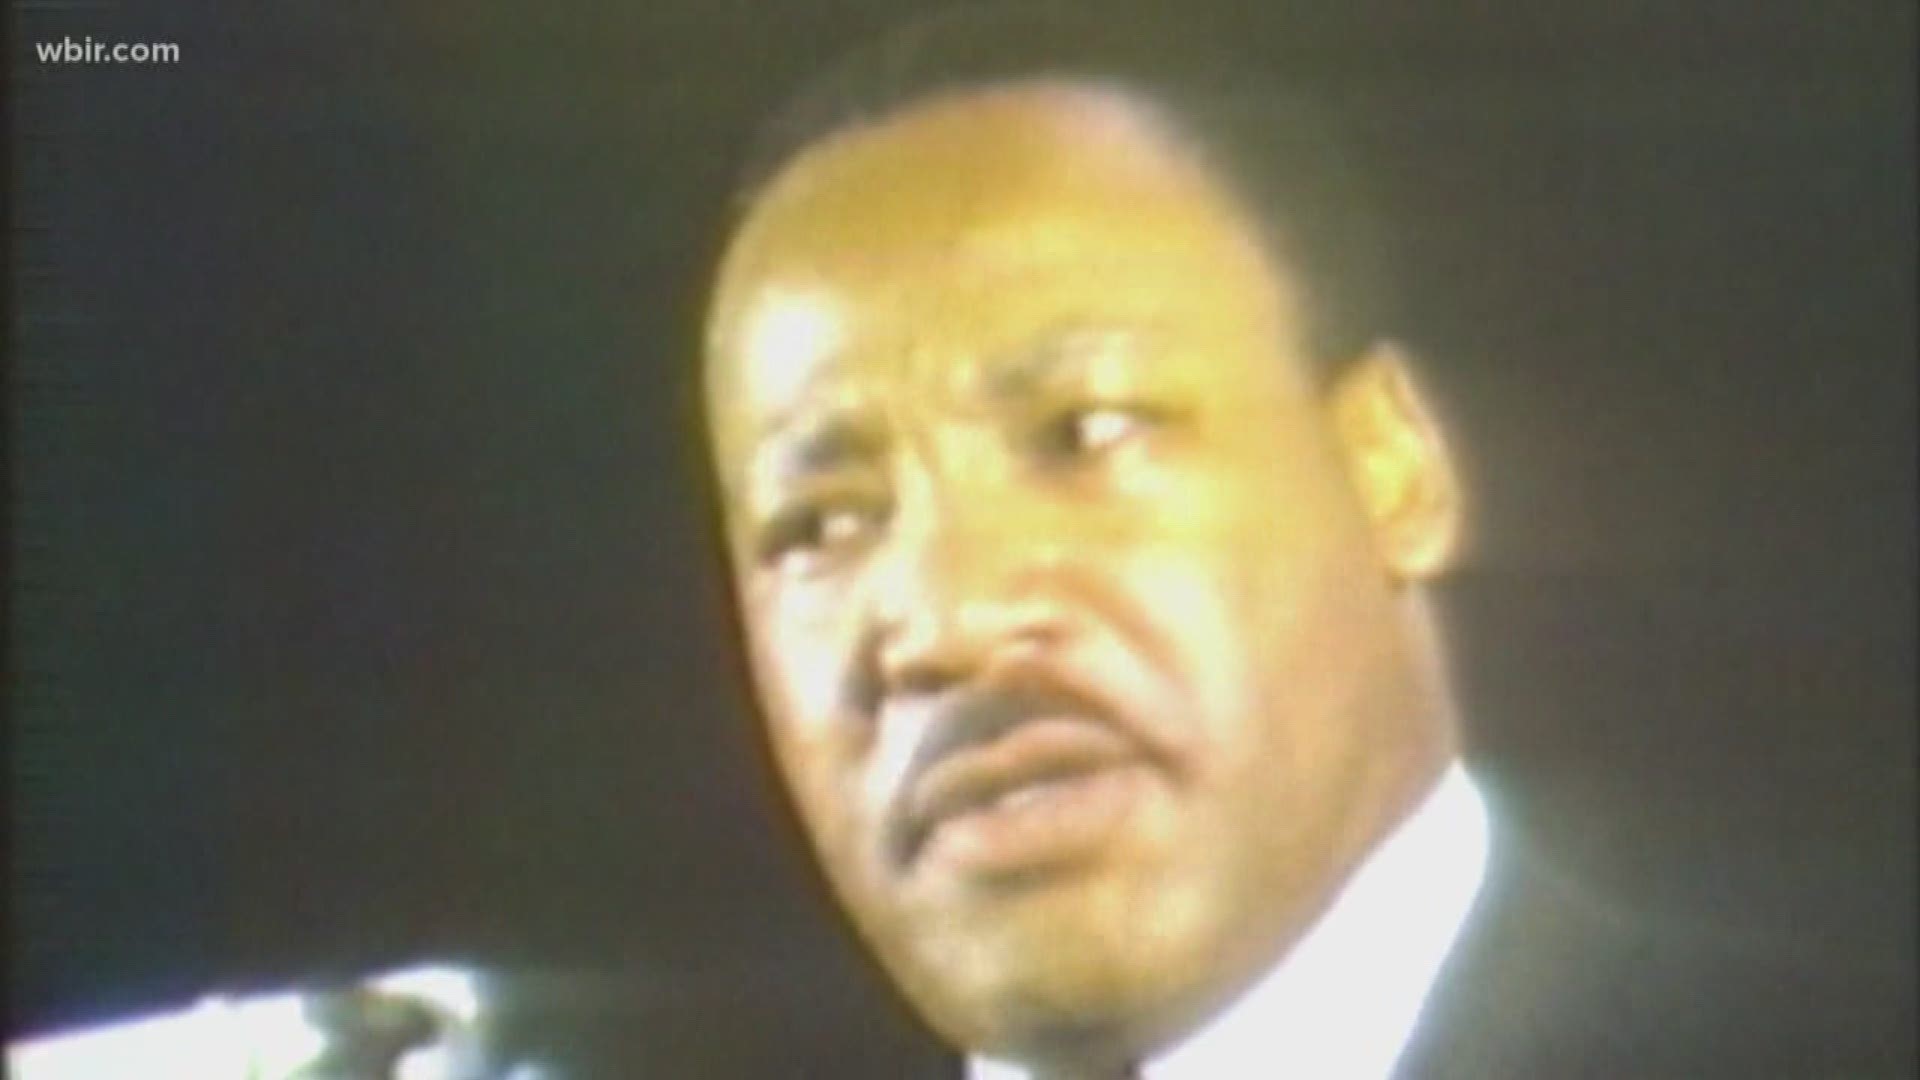 Monday is a federal holiday to honor the life and legacy of Dr. Martin Luther King Junior.